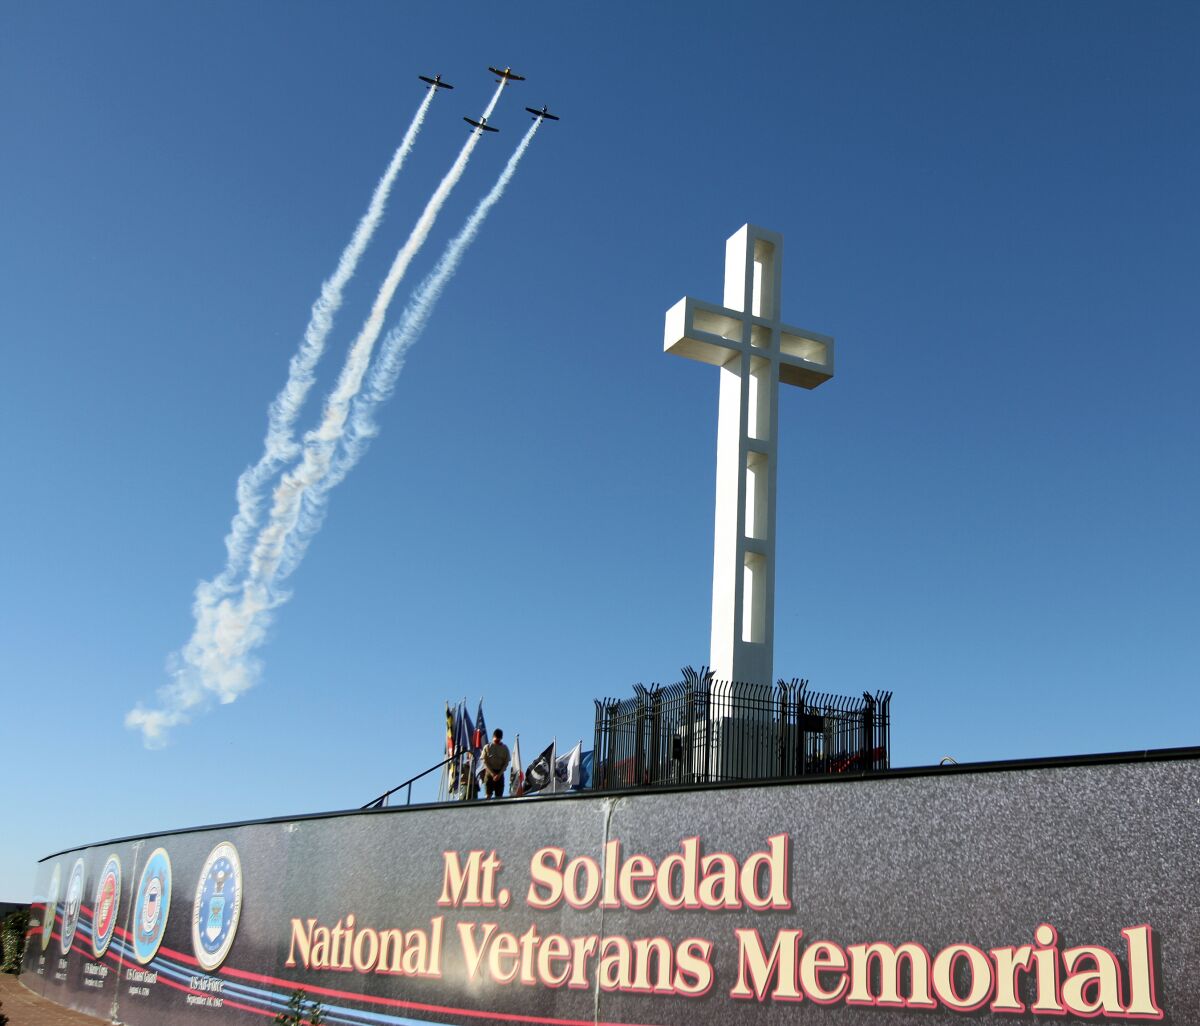 The traditional Mount Soledad National Veterans Memorial event for Memorial Day will be held online Monday, May 25, 2020.